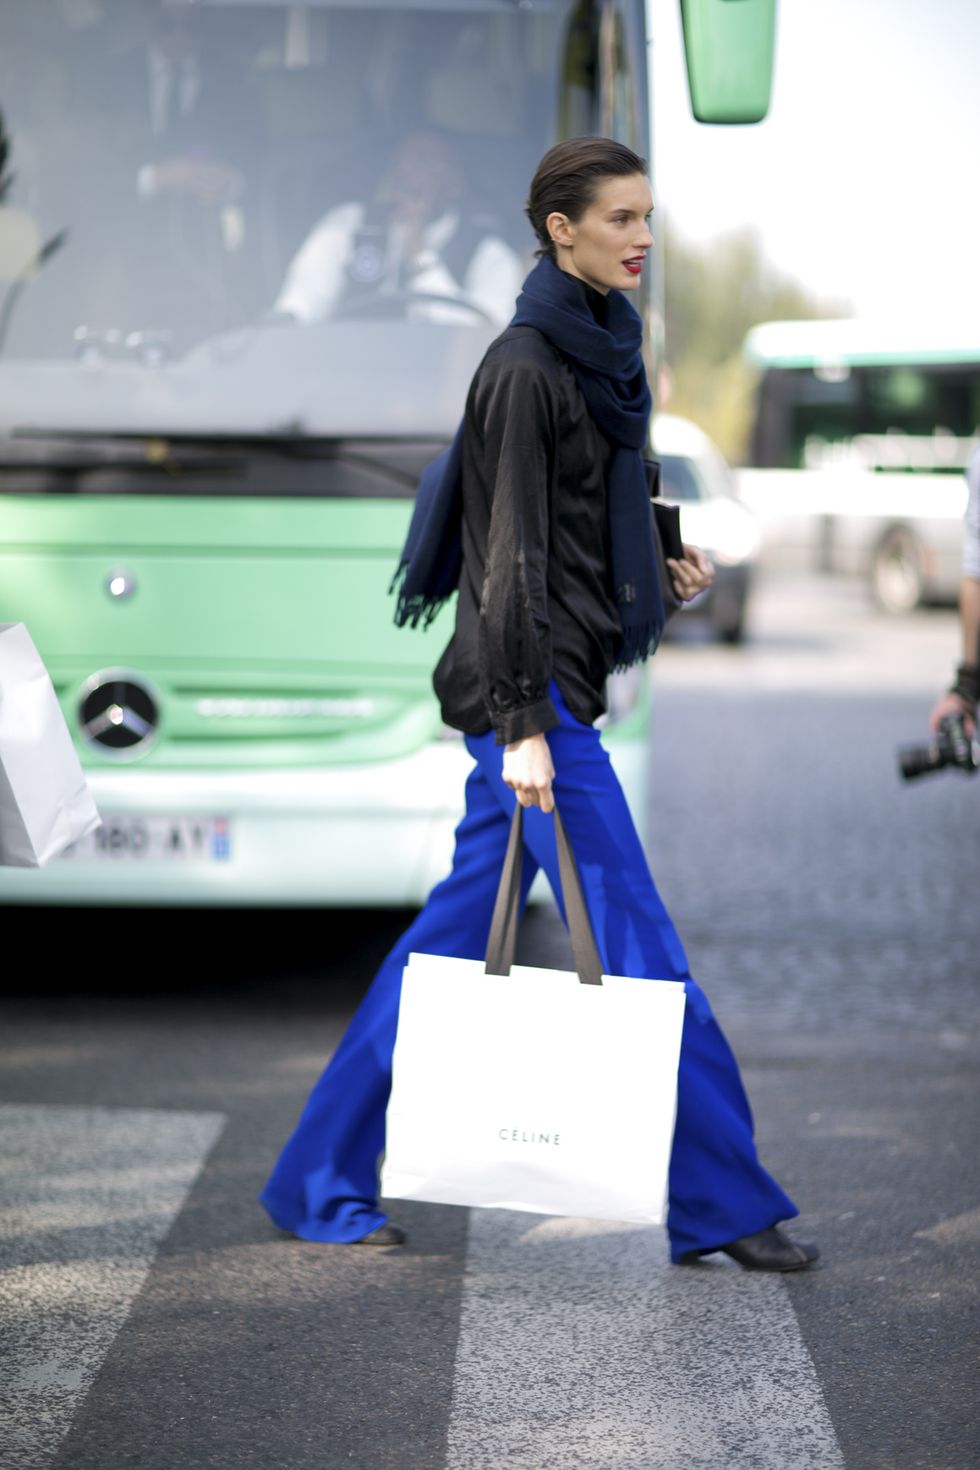 Cobalt blue, Blue, Street fashion, Electric blue, Standing, Fashion, Snapshot, Pedestrian, Outerwear, Luggage and bags, 